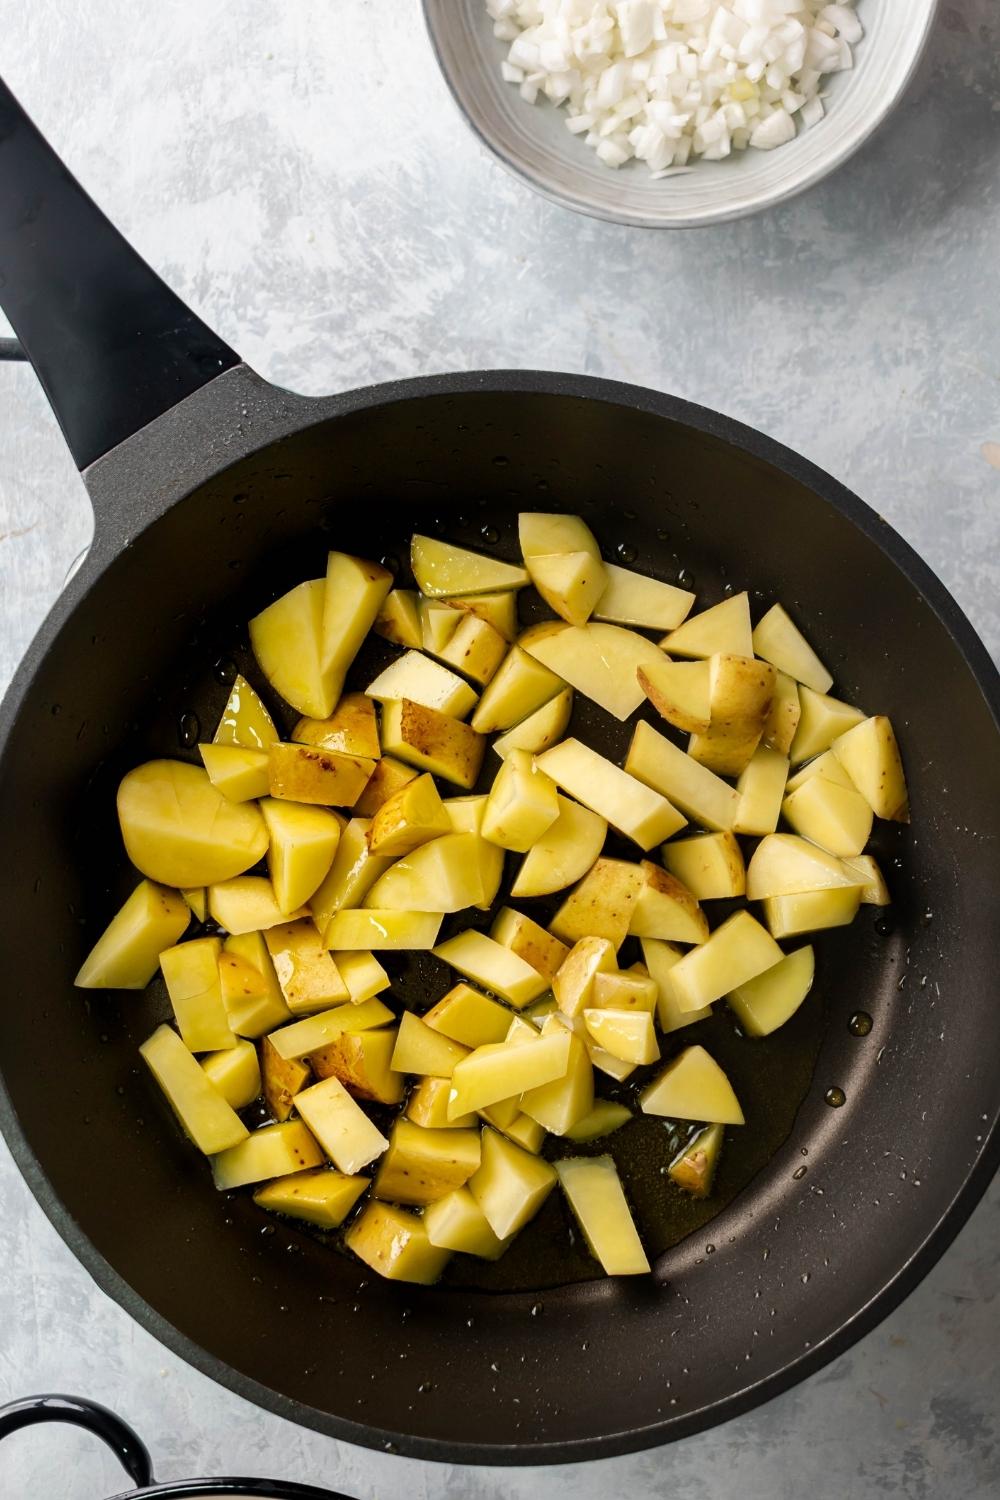 An overhead view of cubed potatoes in an iron pan with oil.